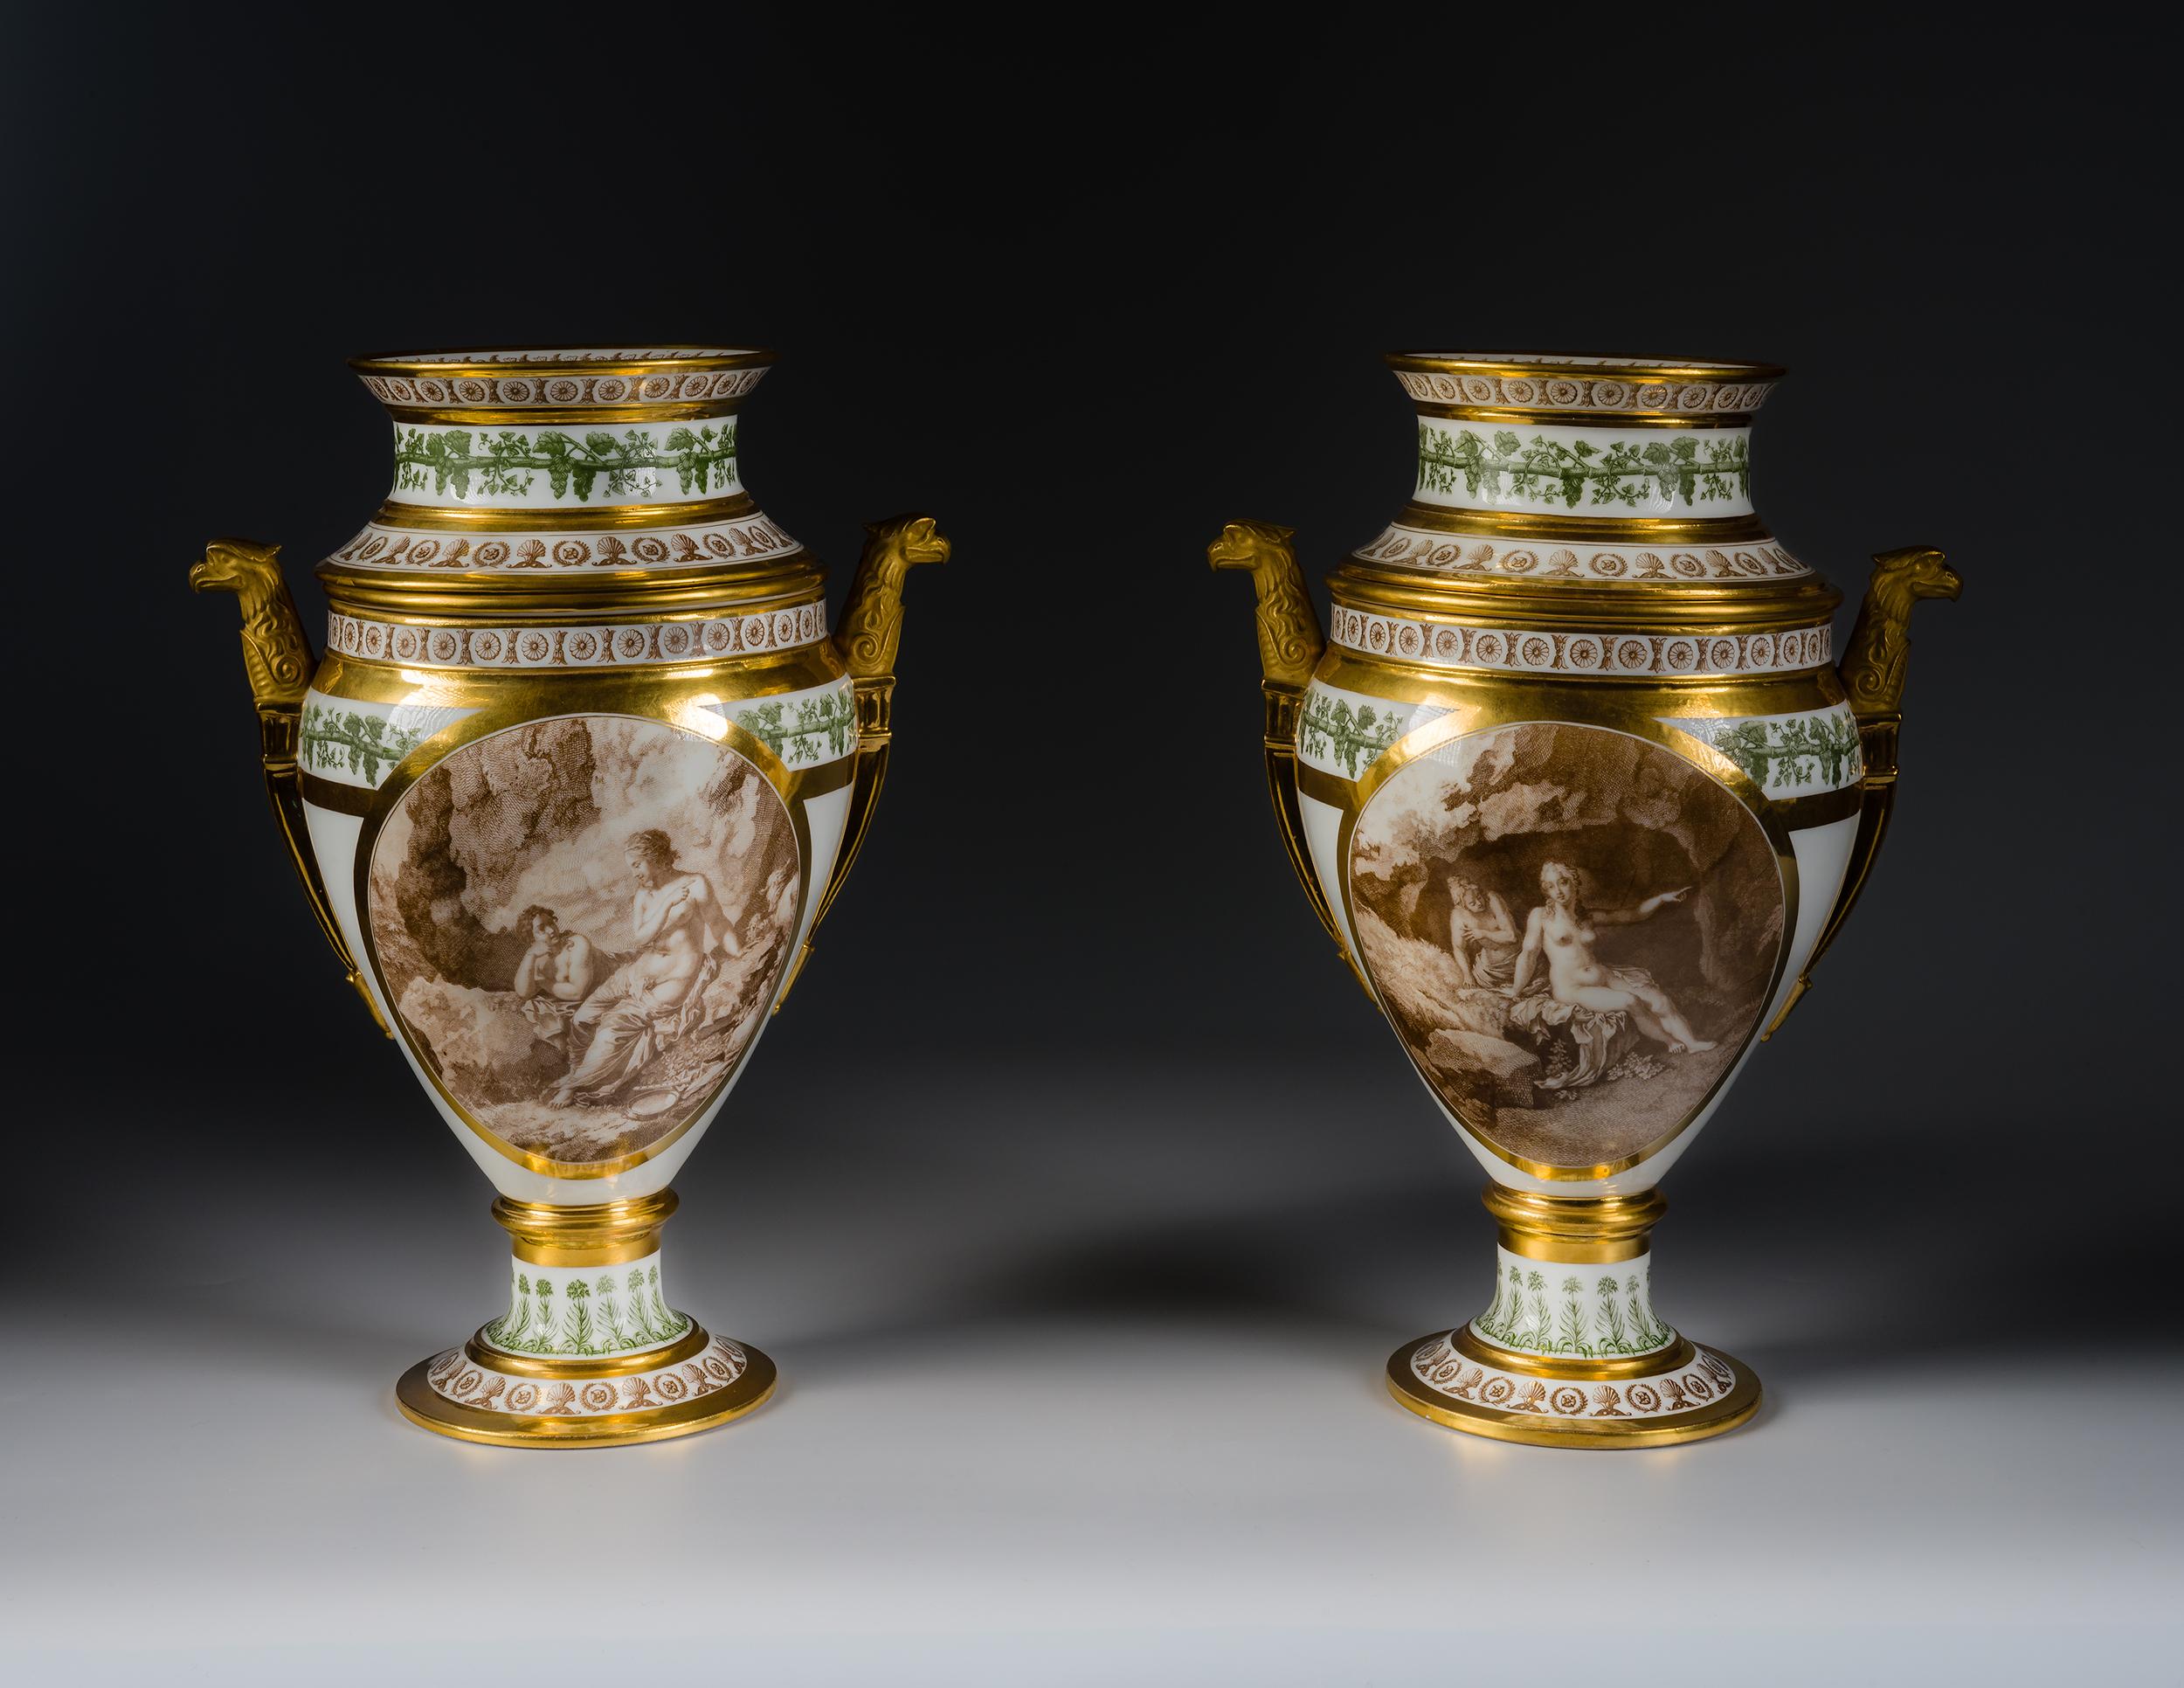 Pair Footed Fruit Coolers, about 1810-20
Stône, Coquerel, and Legros D’Anisy, Paris (active 1808–49)
Porcelain, partially transfer printed in sepia and green and gilded
Each, 13 1/2 in. high x 10 in. wide x 7 1/2 in. deep
Signed and inscribed